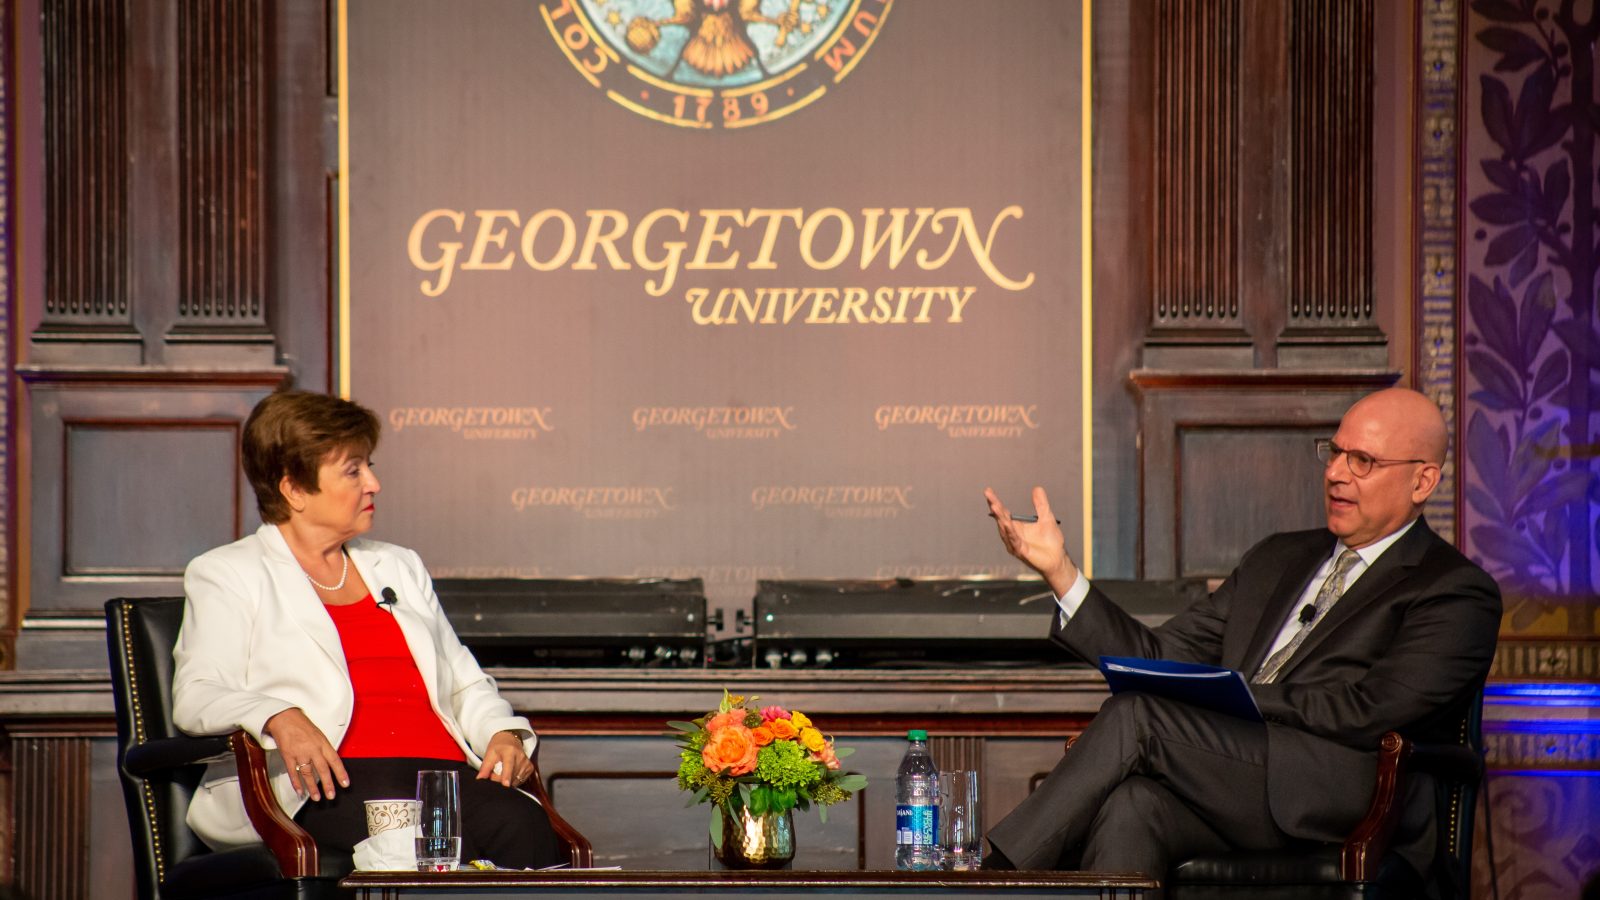 Dean Hellman gestures with his hands as he asks Georgieva a question. The two are seated side-by-side while on-stage in Gaston Hall.